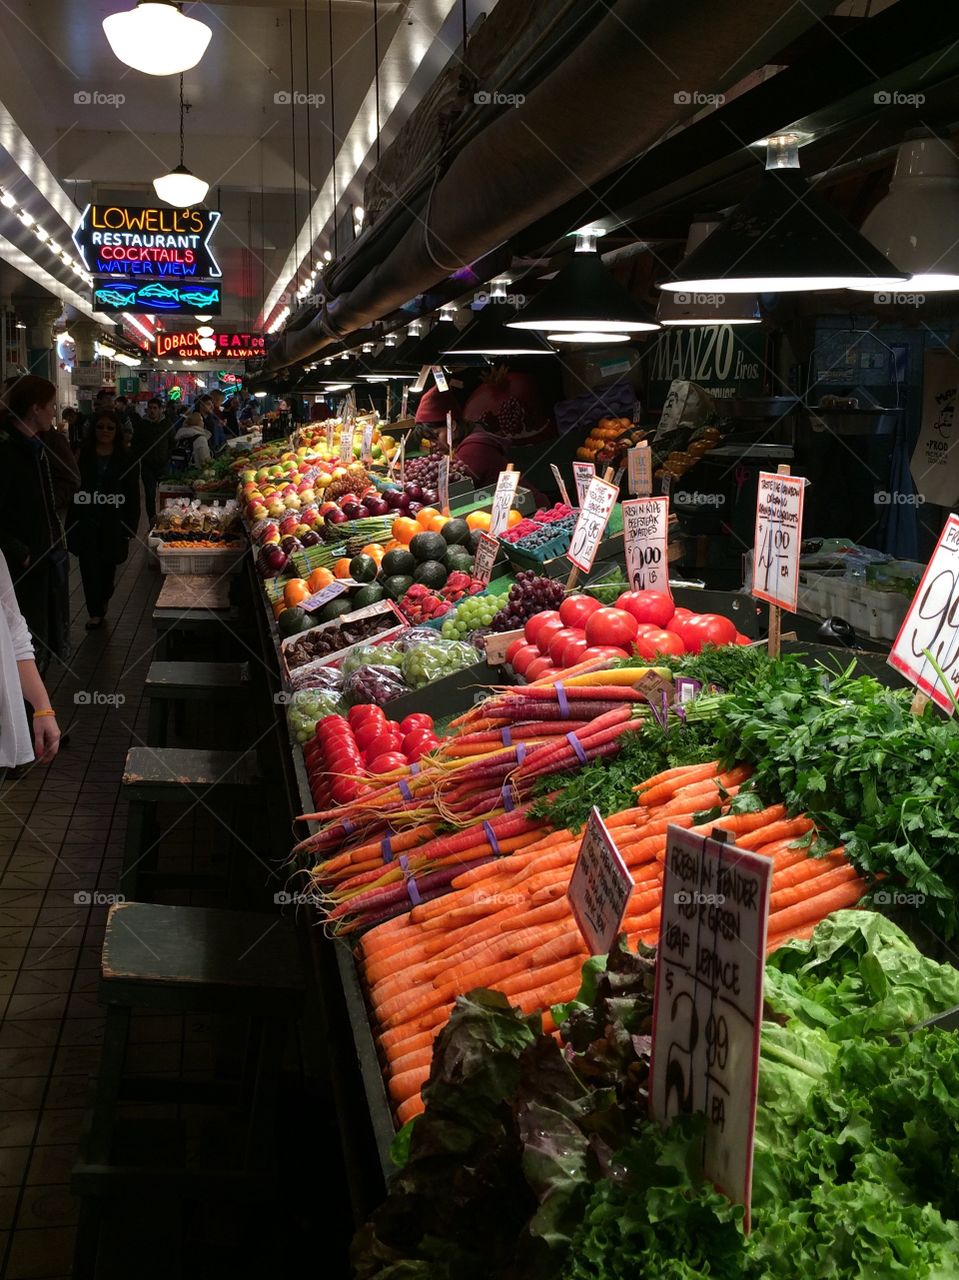 Seattle market. Waking in a Seattle market I saw this vegetable stand. Very colorful. 